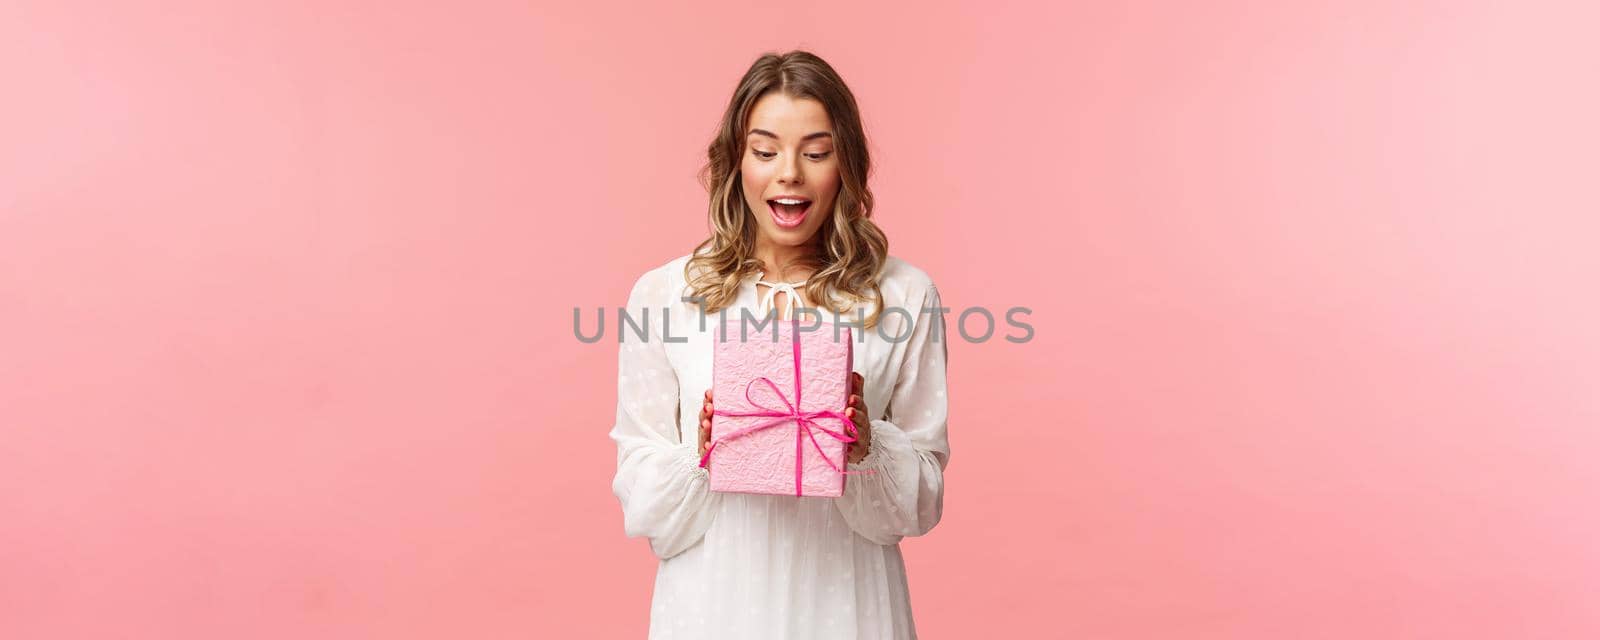 Holidays, celebration and women concept. Portrait of surprised charming young blond girl receive surprise gift, holding present in pink box look at it amused, curious whats inside, studio background.